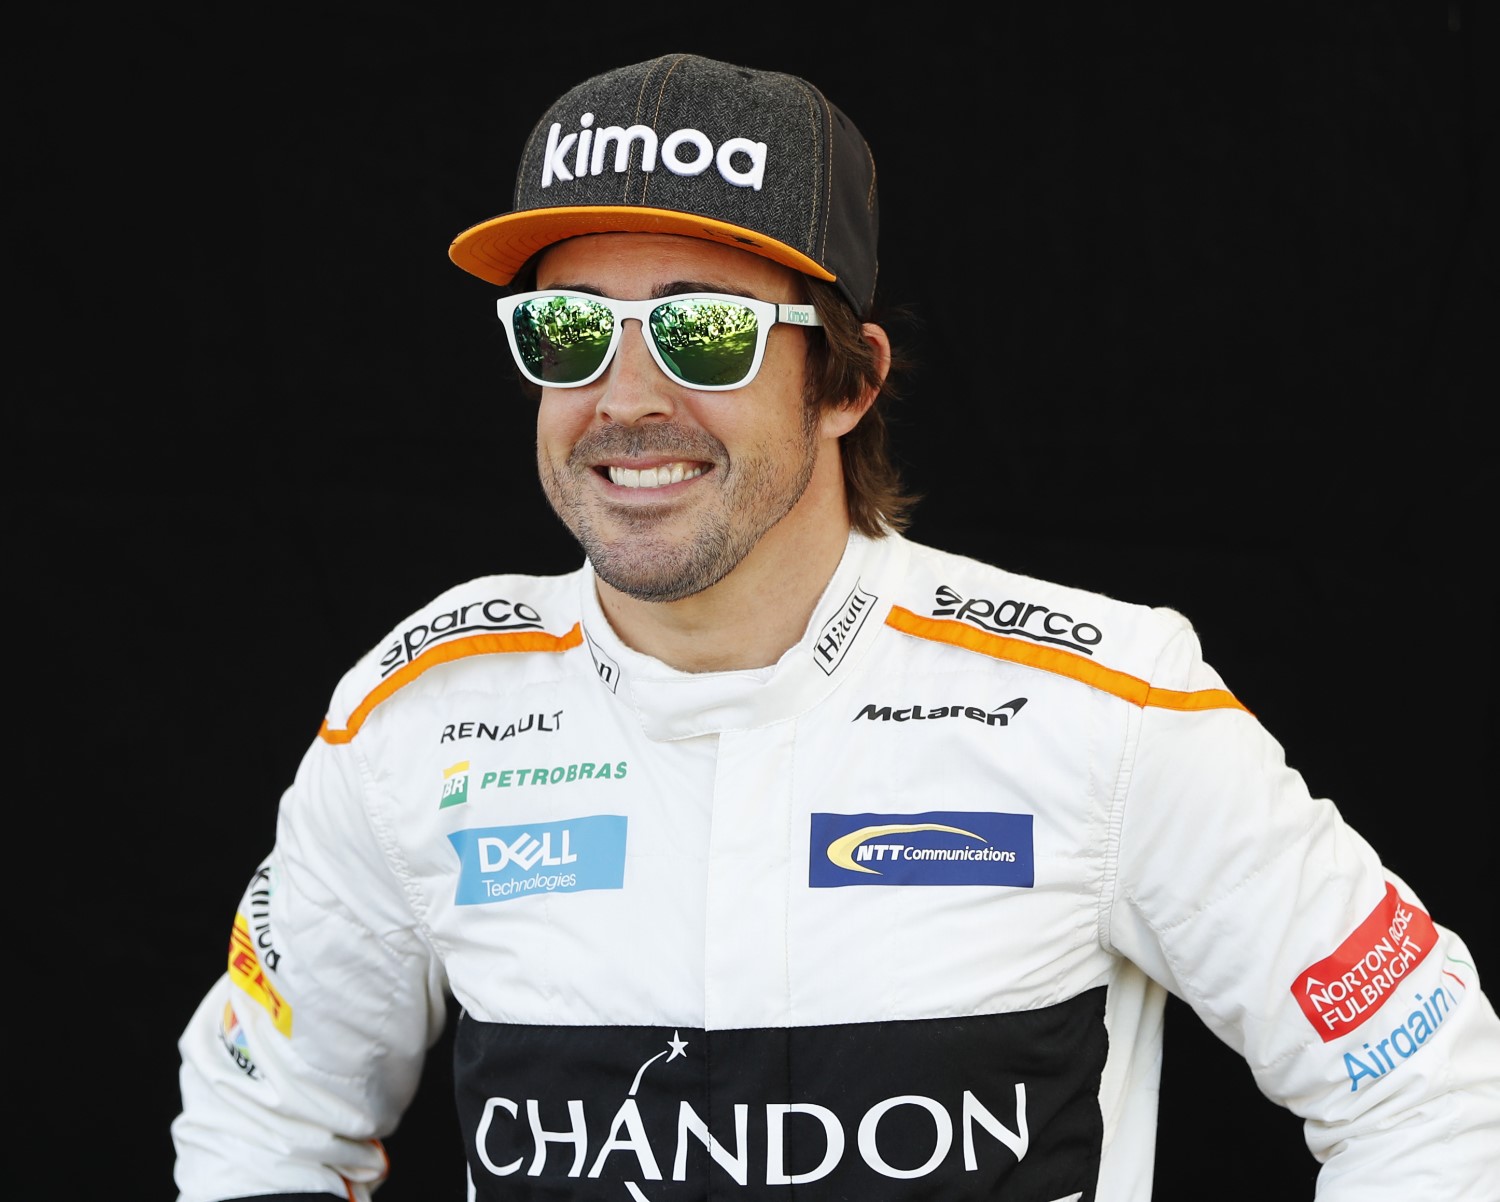 Alonso was happy to hold off Verstappen's Red Bull in Australia